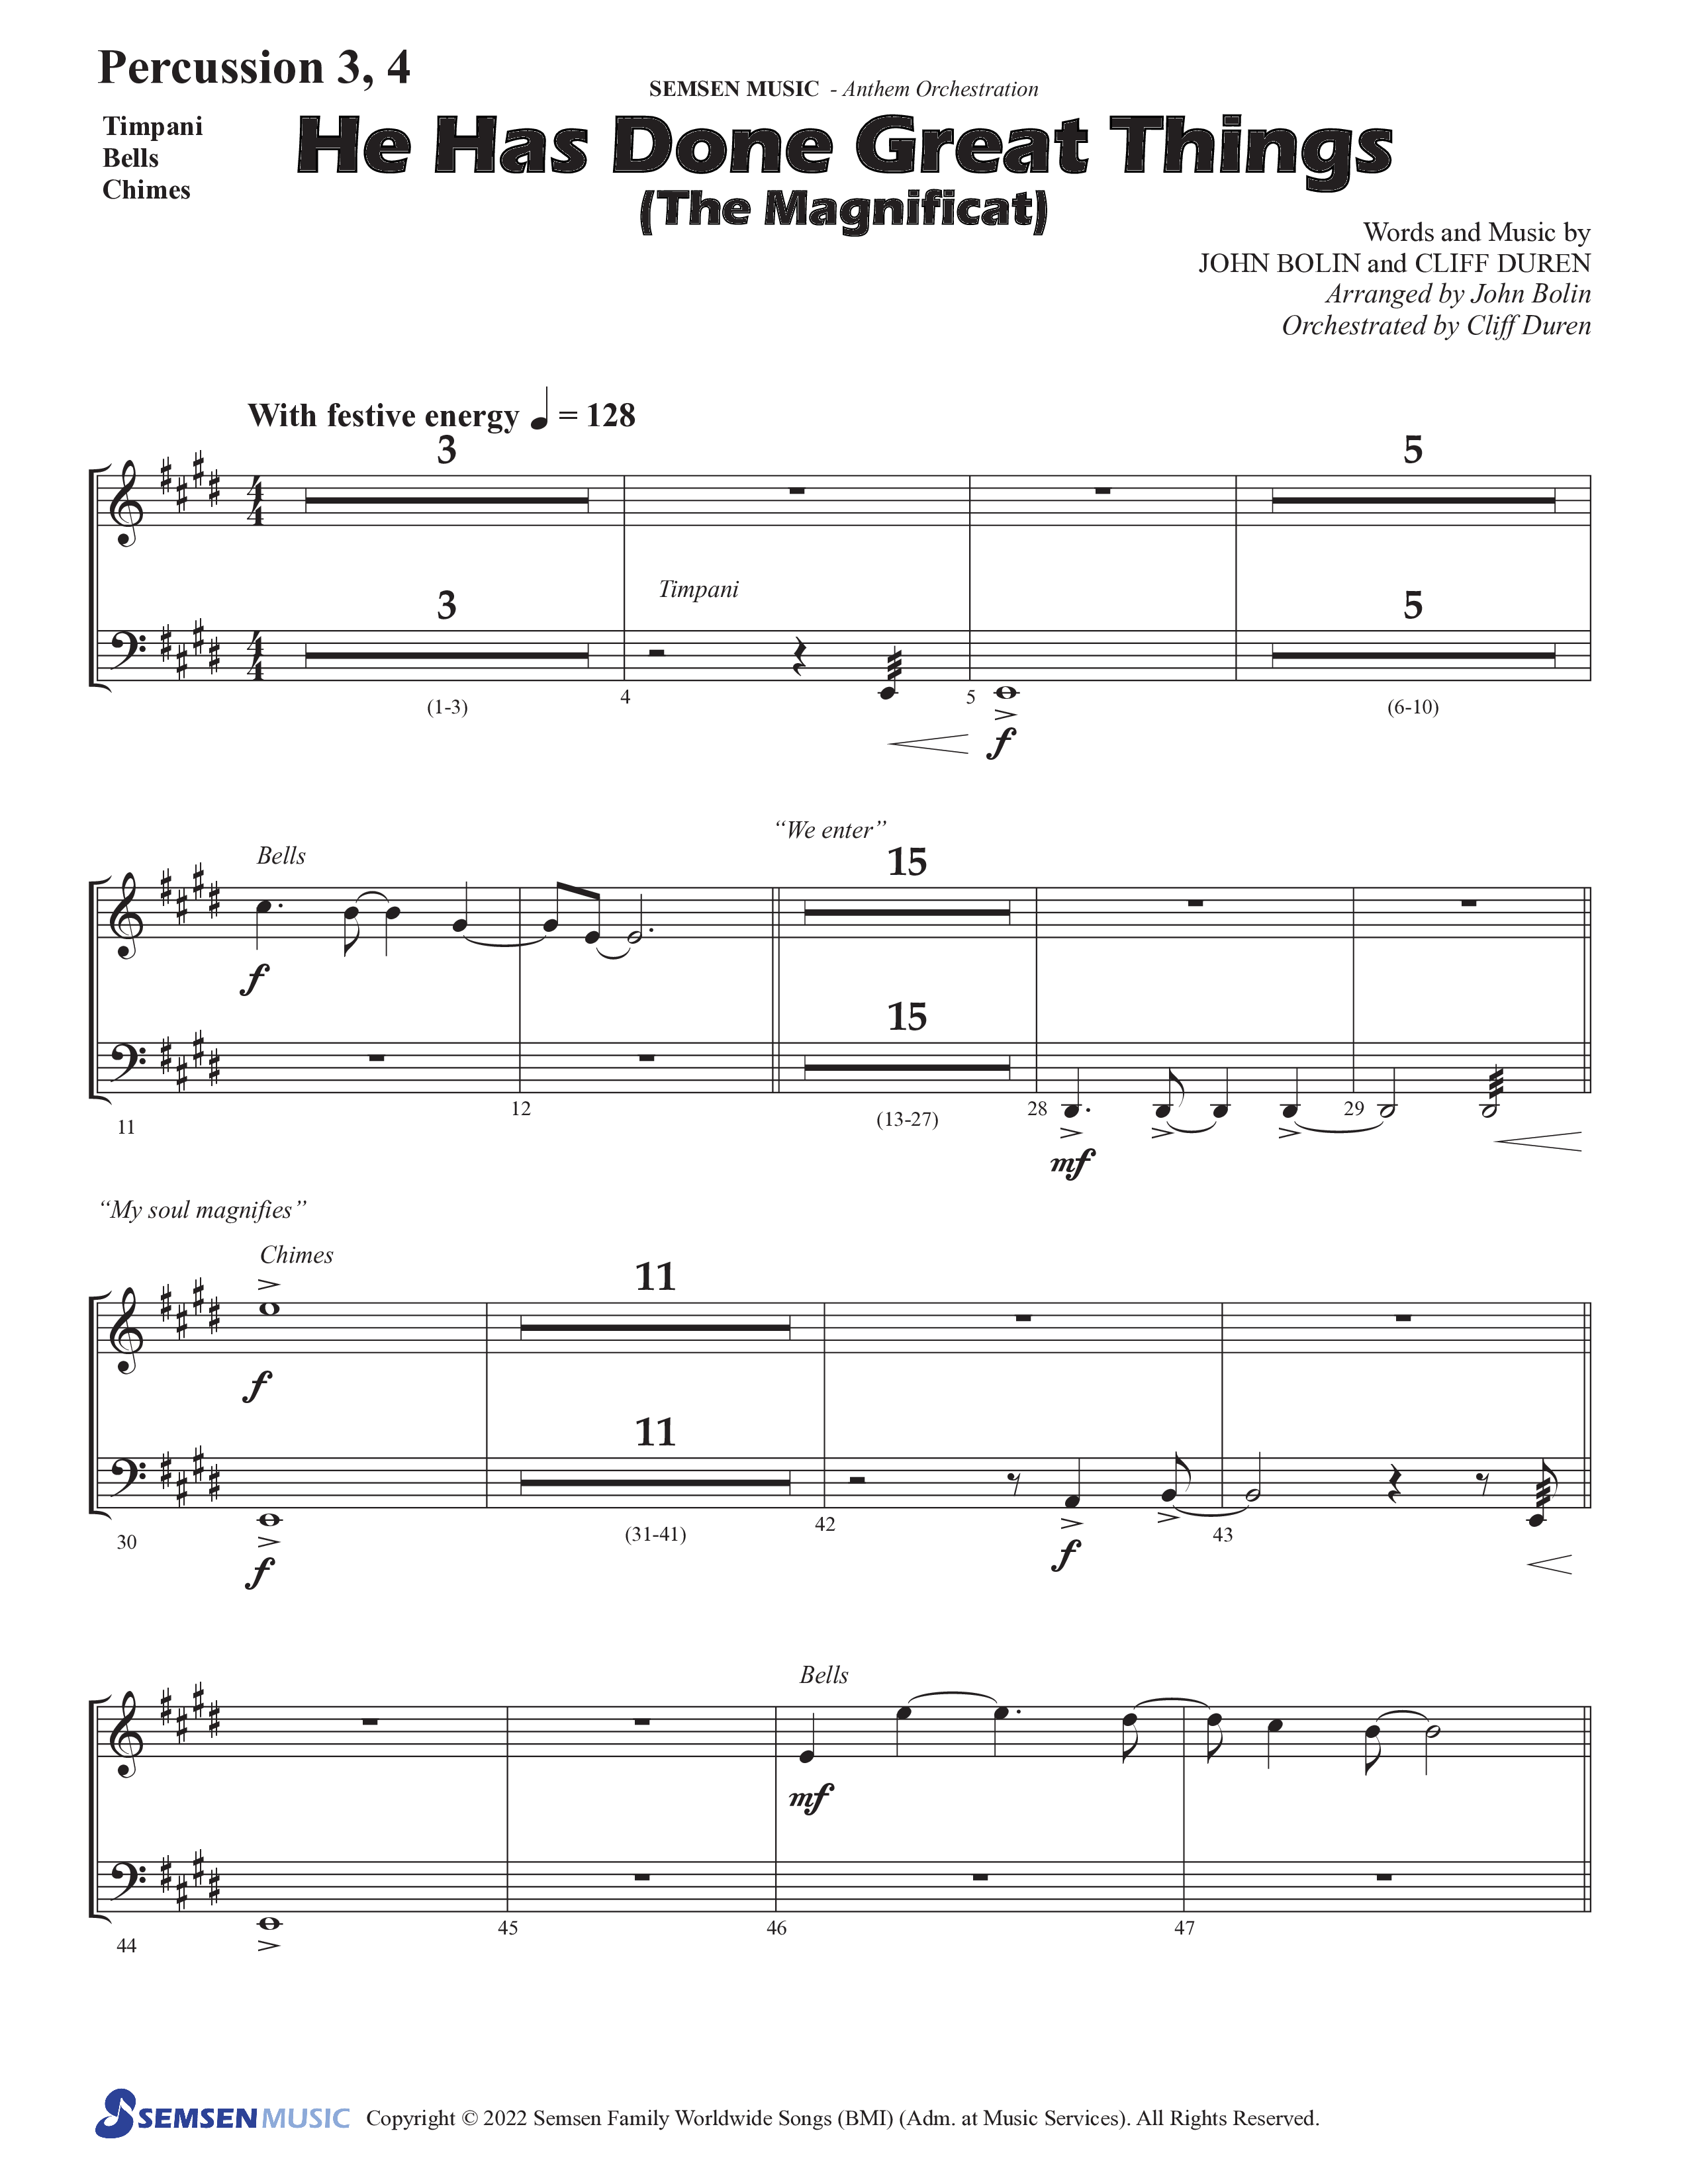 He Has Done Great Things (The Magnificat) (Choral Anthem SATB) Percussion (Semsen Music / Arr. John Bolin / Orch. Cliff Duren)